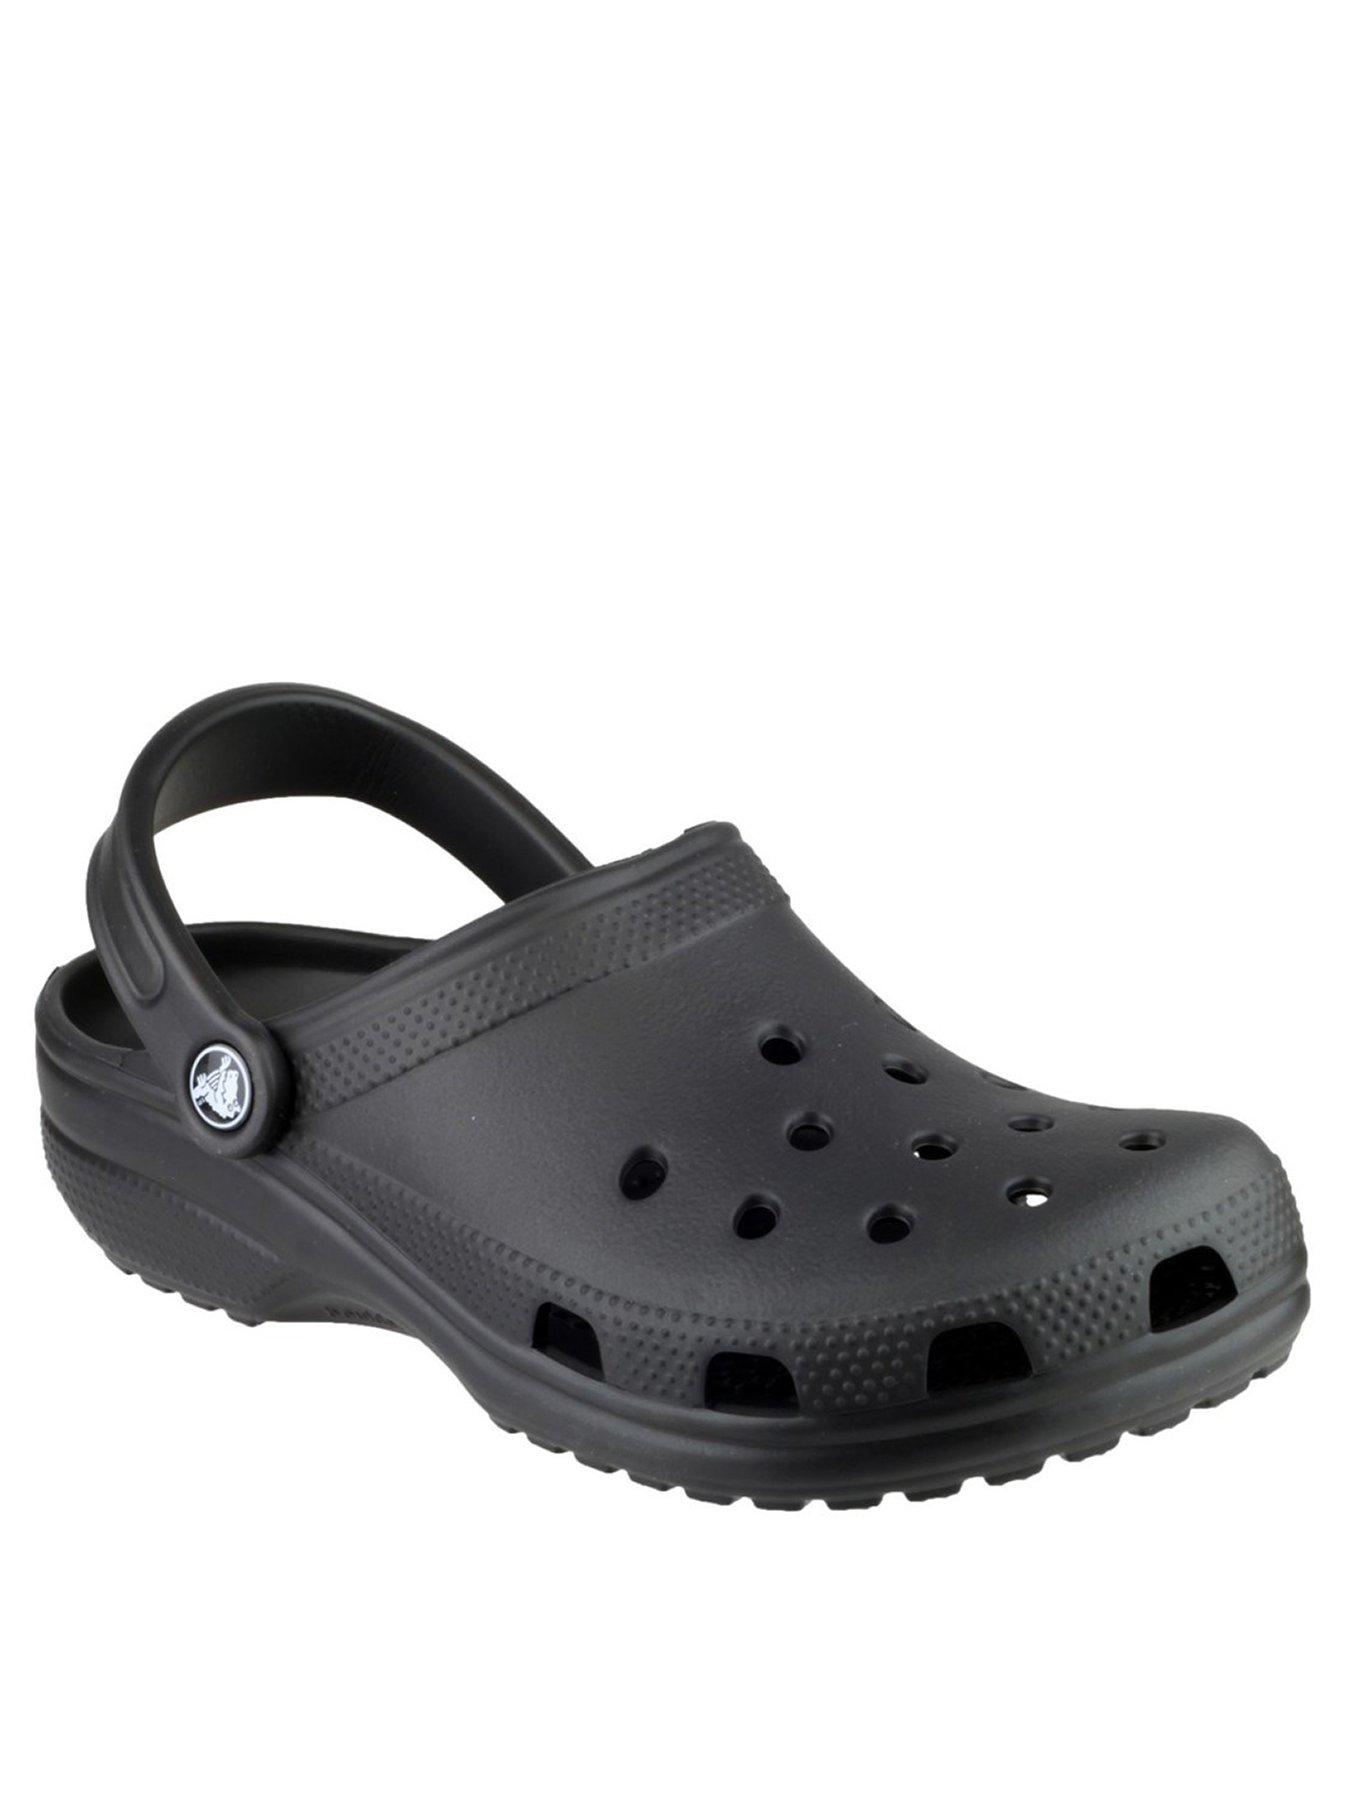 crocs busy day shoes